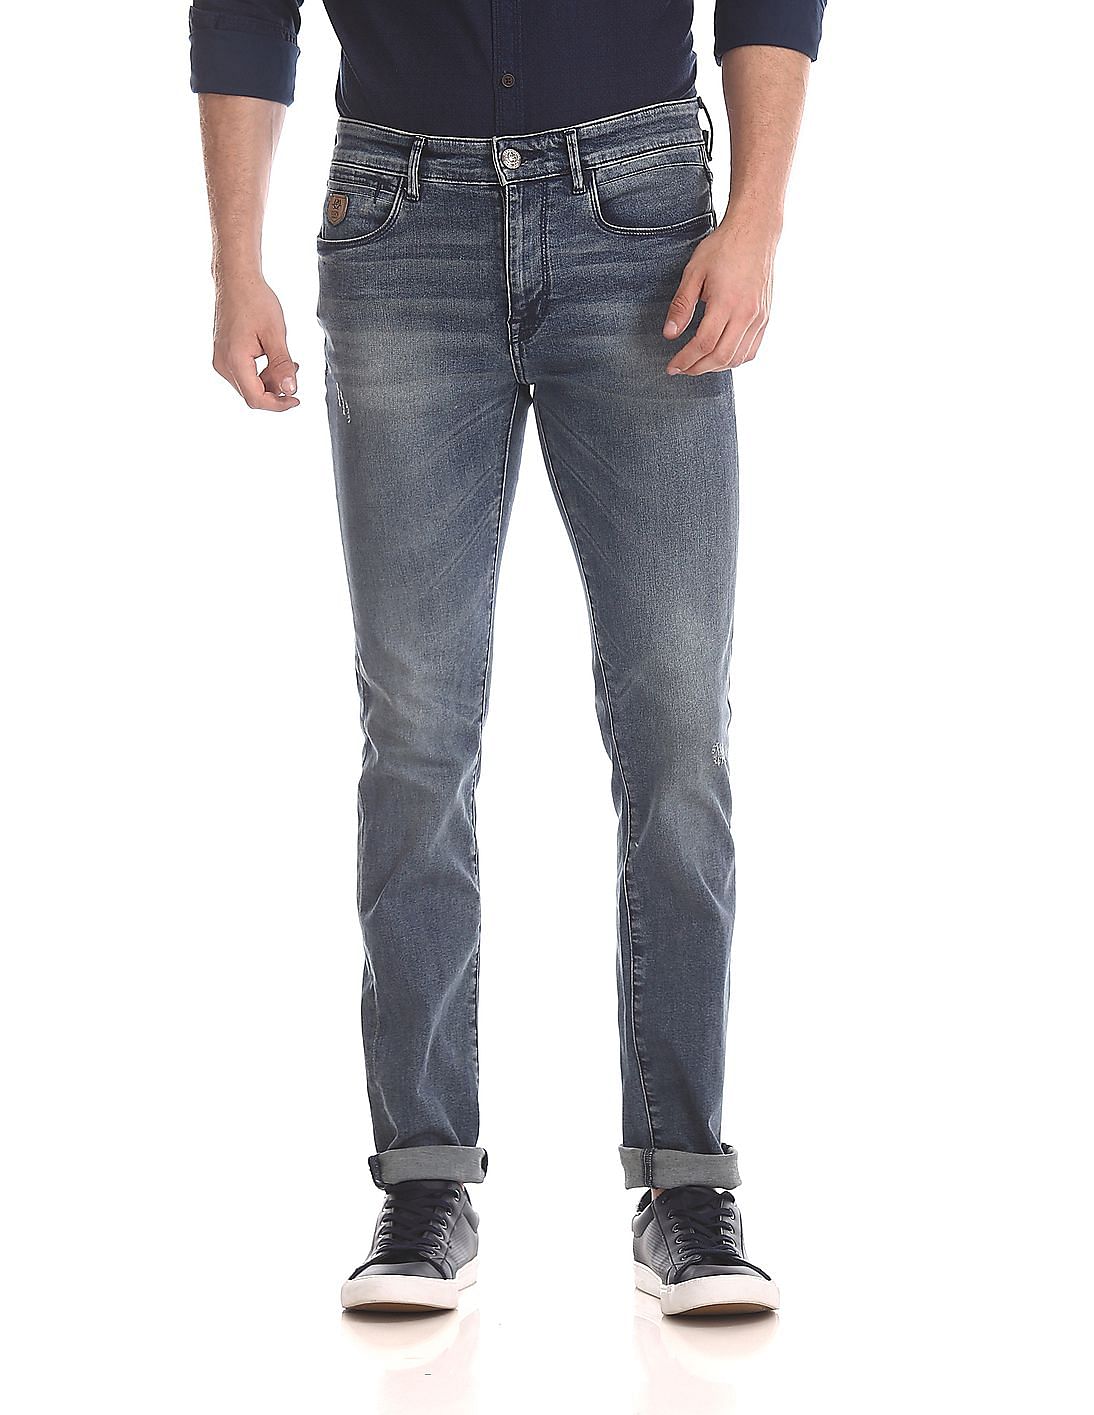 Buy Men Regallo Skinny Fit Washed Jeans online at NNNOW.com